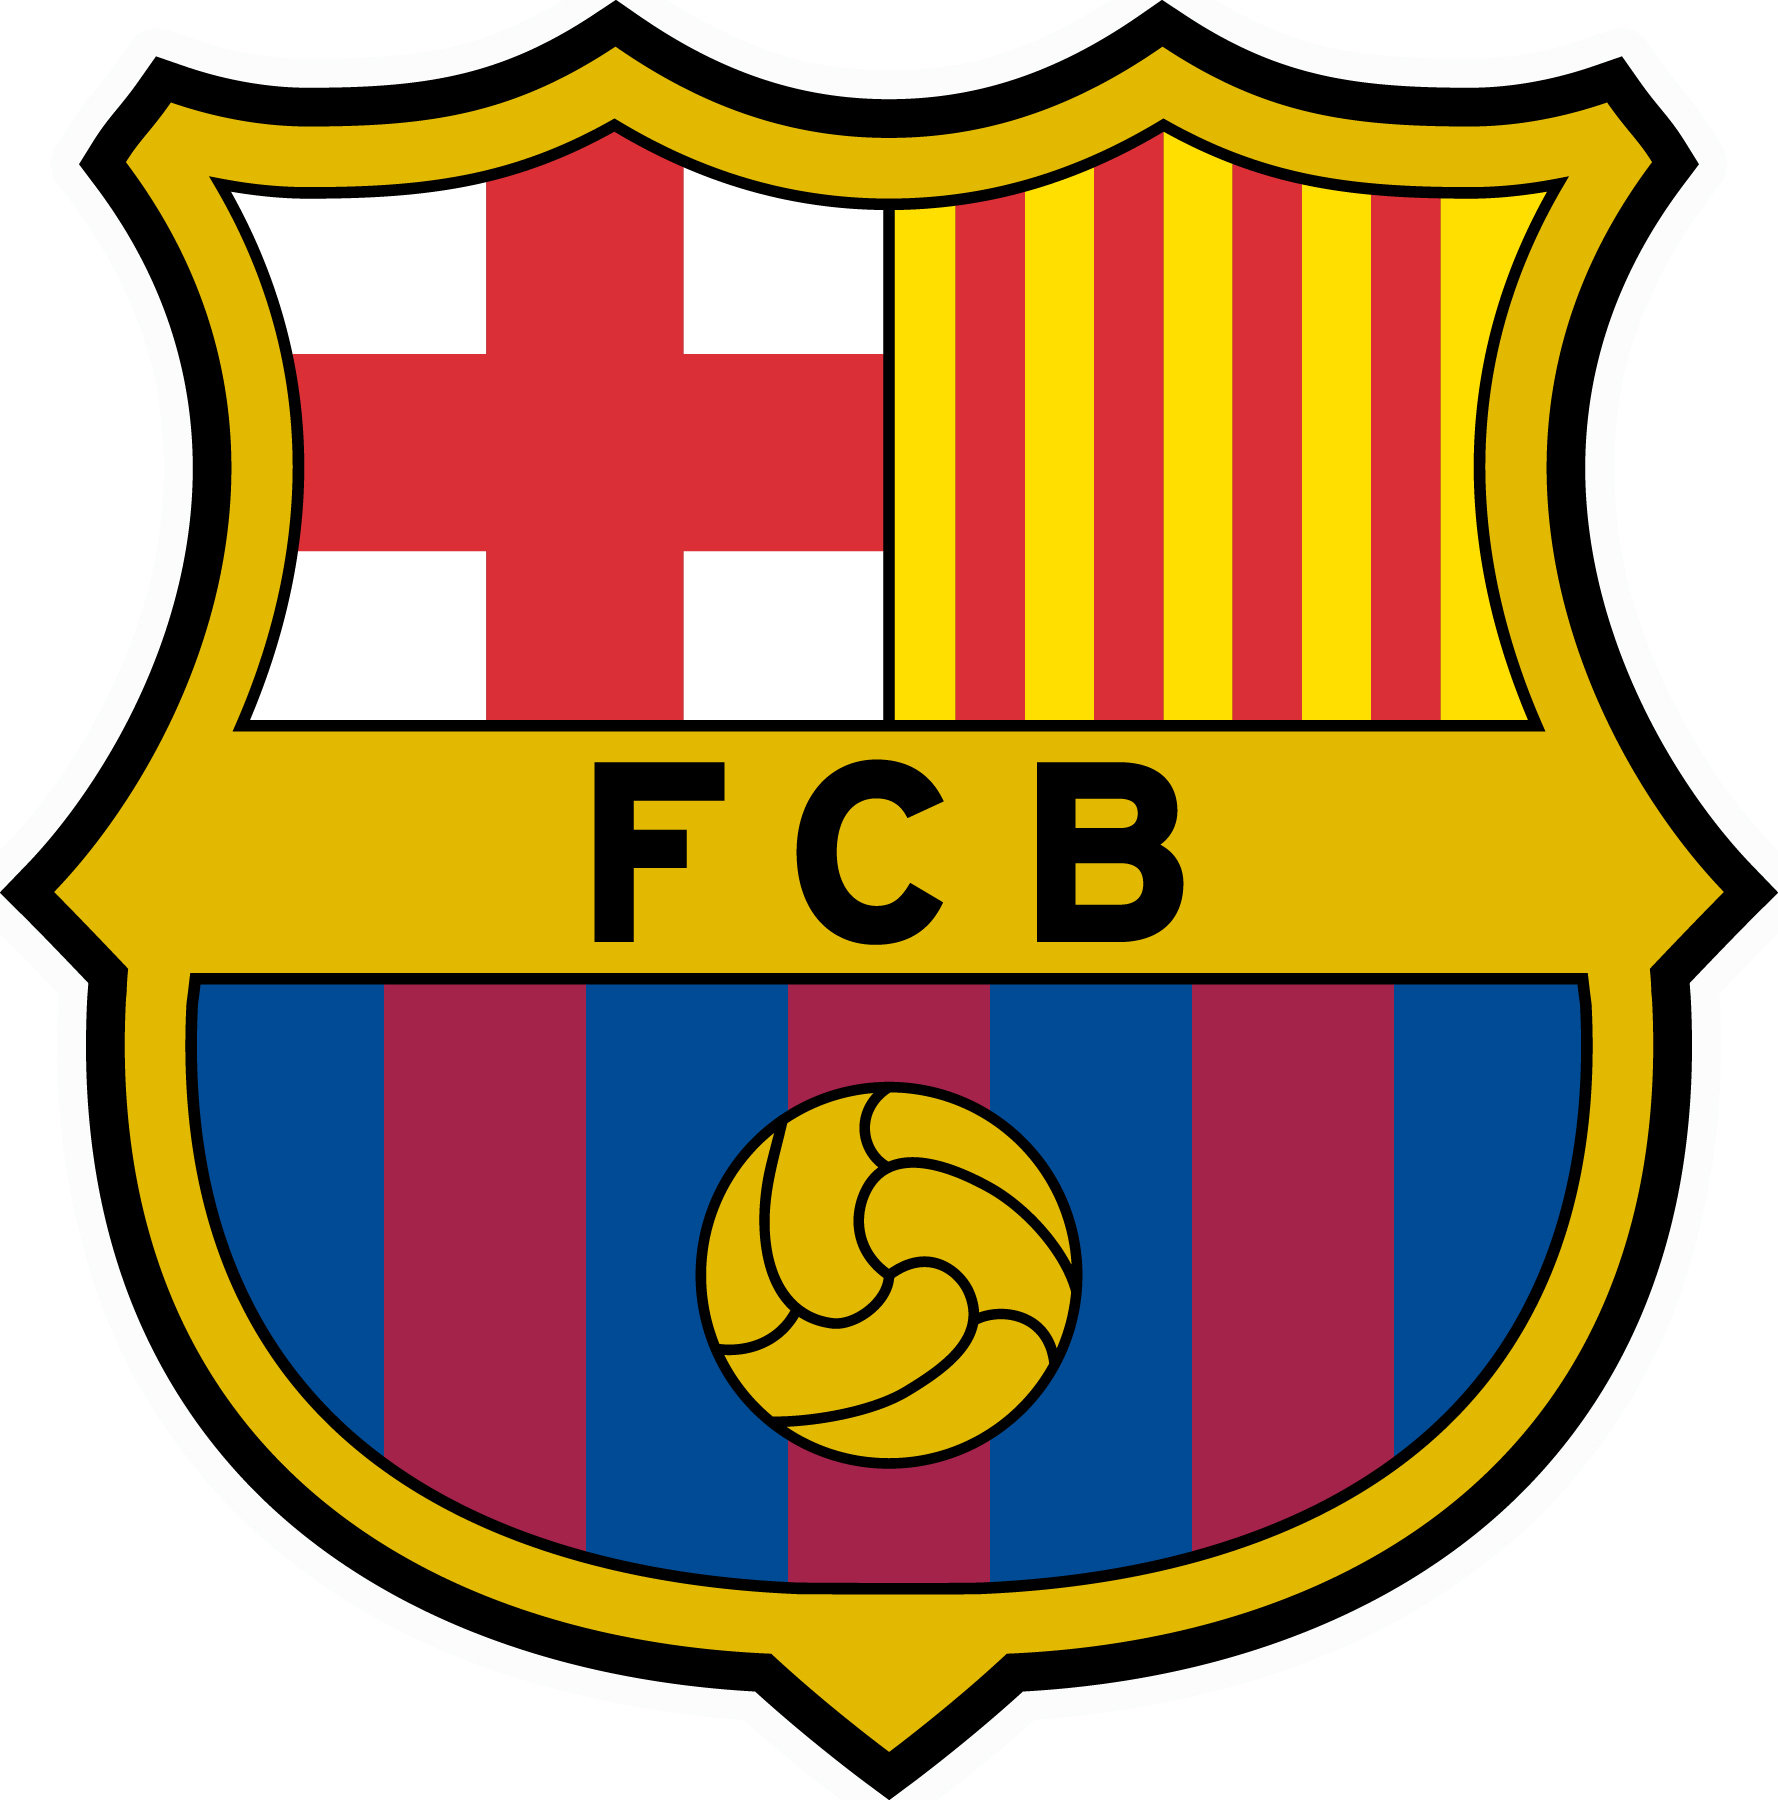 FC Barcelona Football Club Crest Miscellaneous Pack 3-D Stickers Free UK P&P 